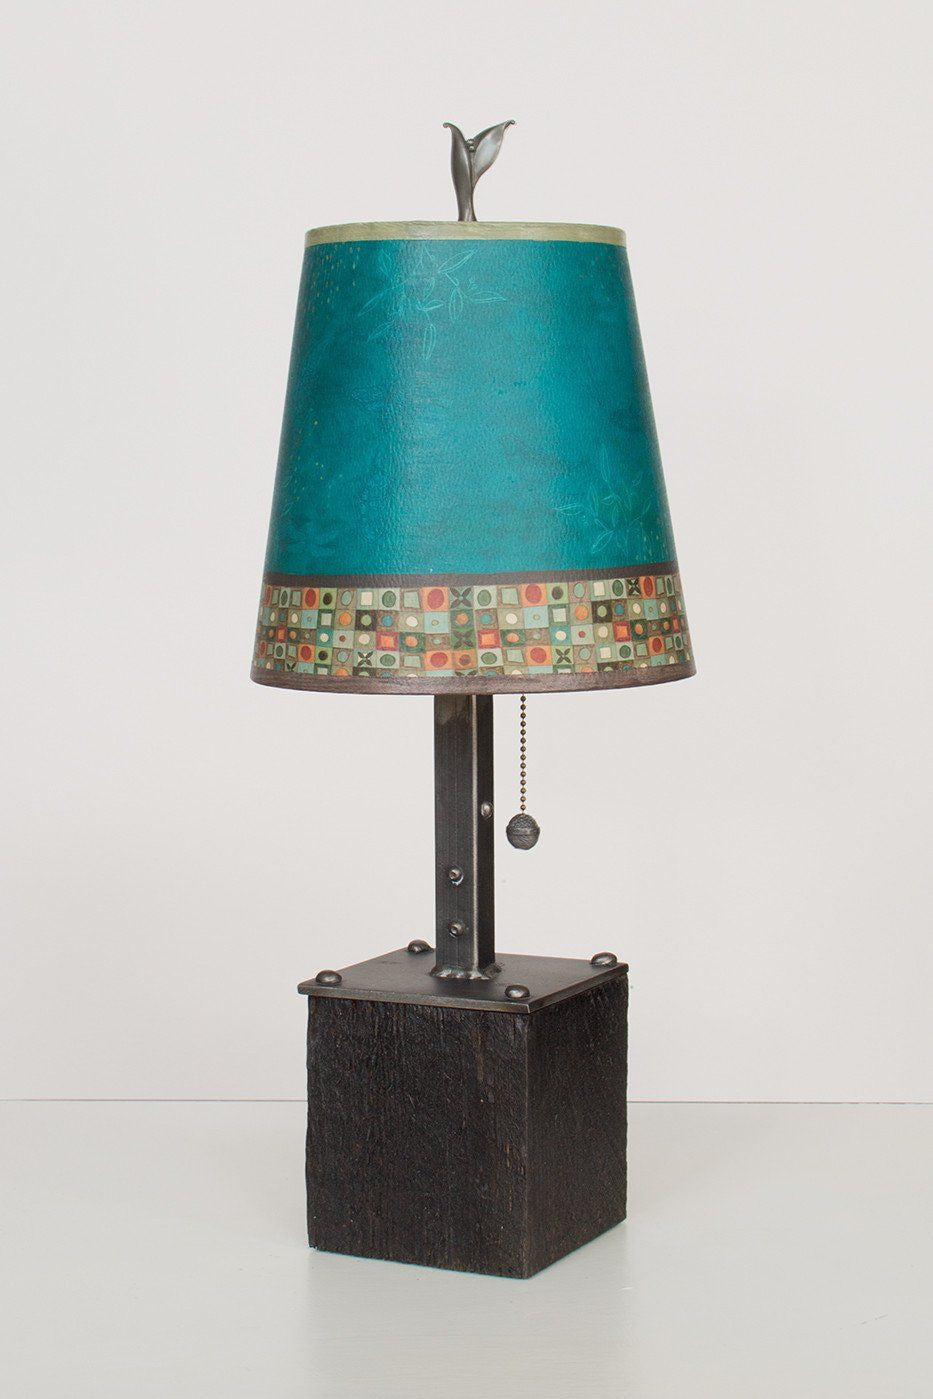 Janna Ugone &amp; Co Table Lamps Steel Table Lamp on Reclaimed Wood with Small Drum Shade in Jade Mosaic